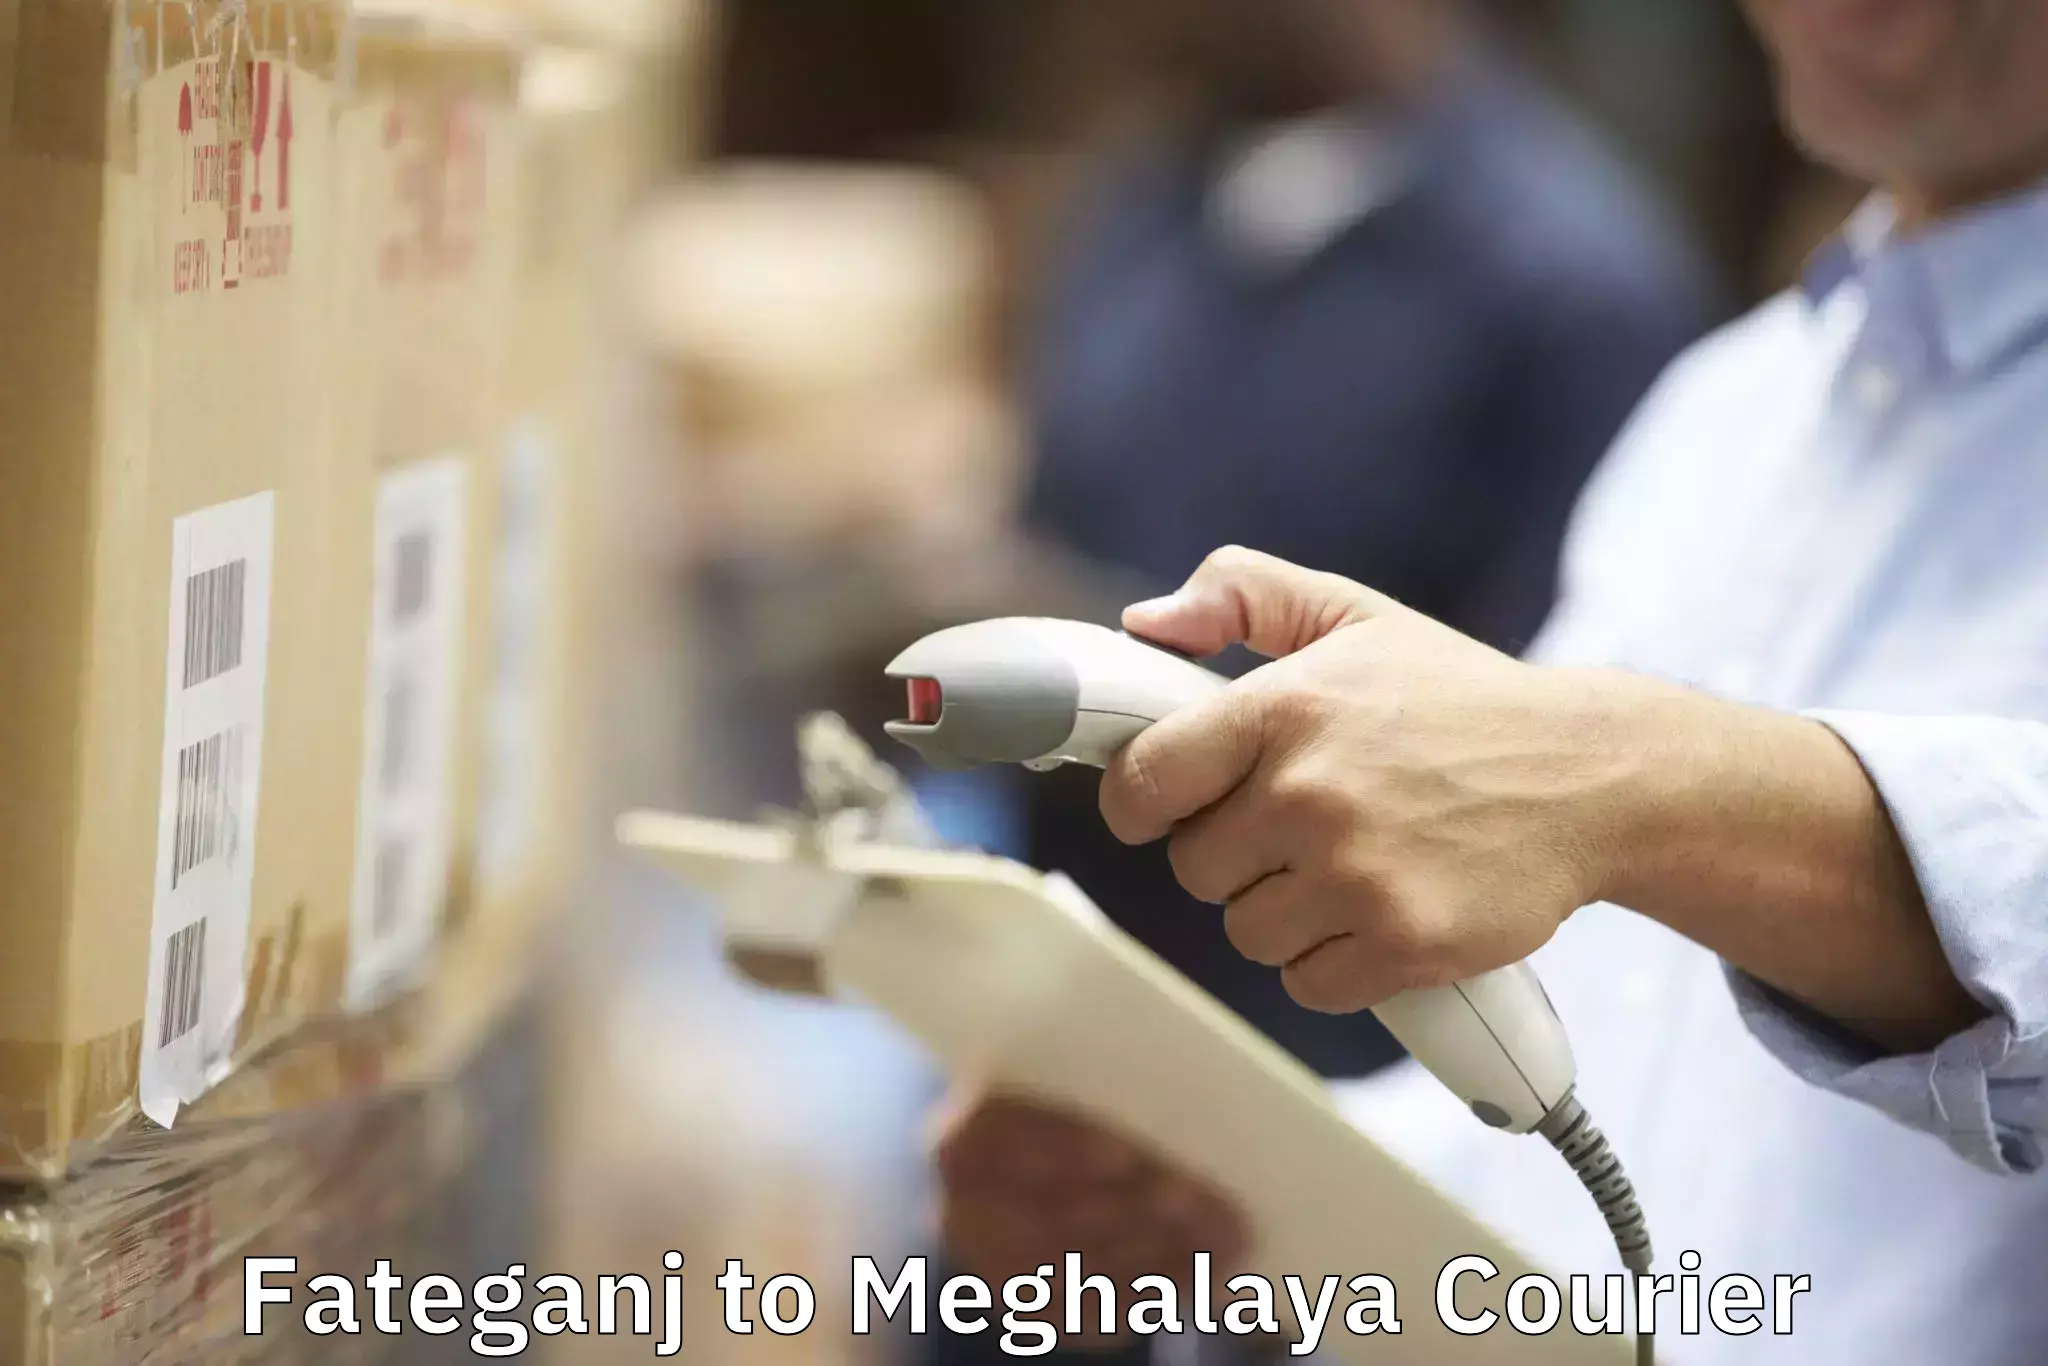 High-quality moving services in Fateganj to Meghalaya